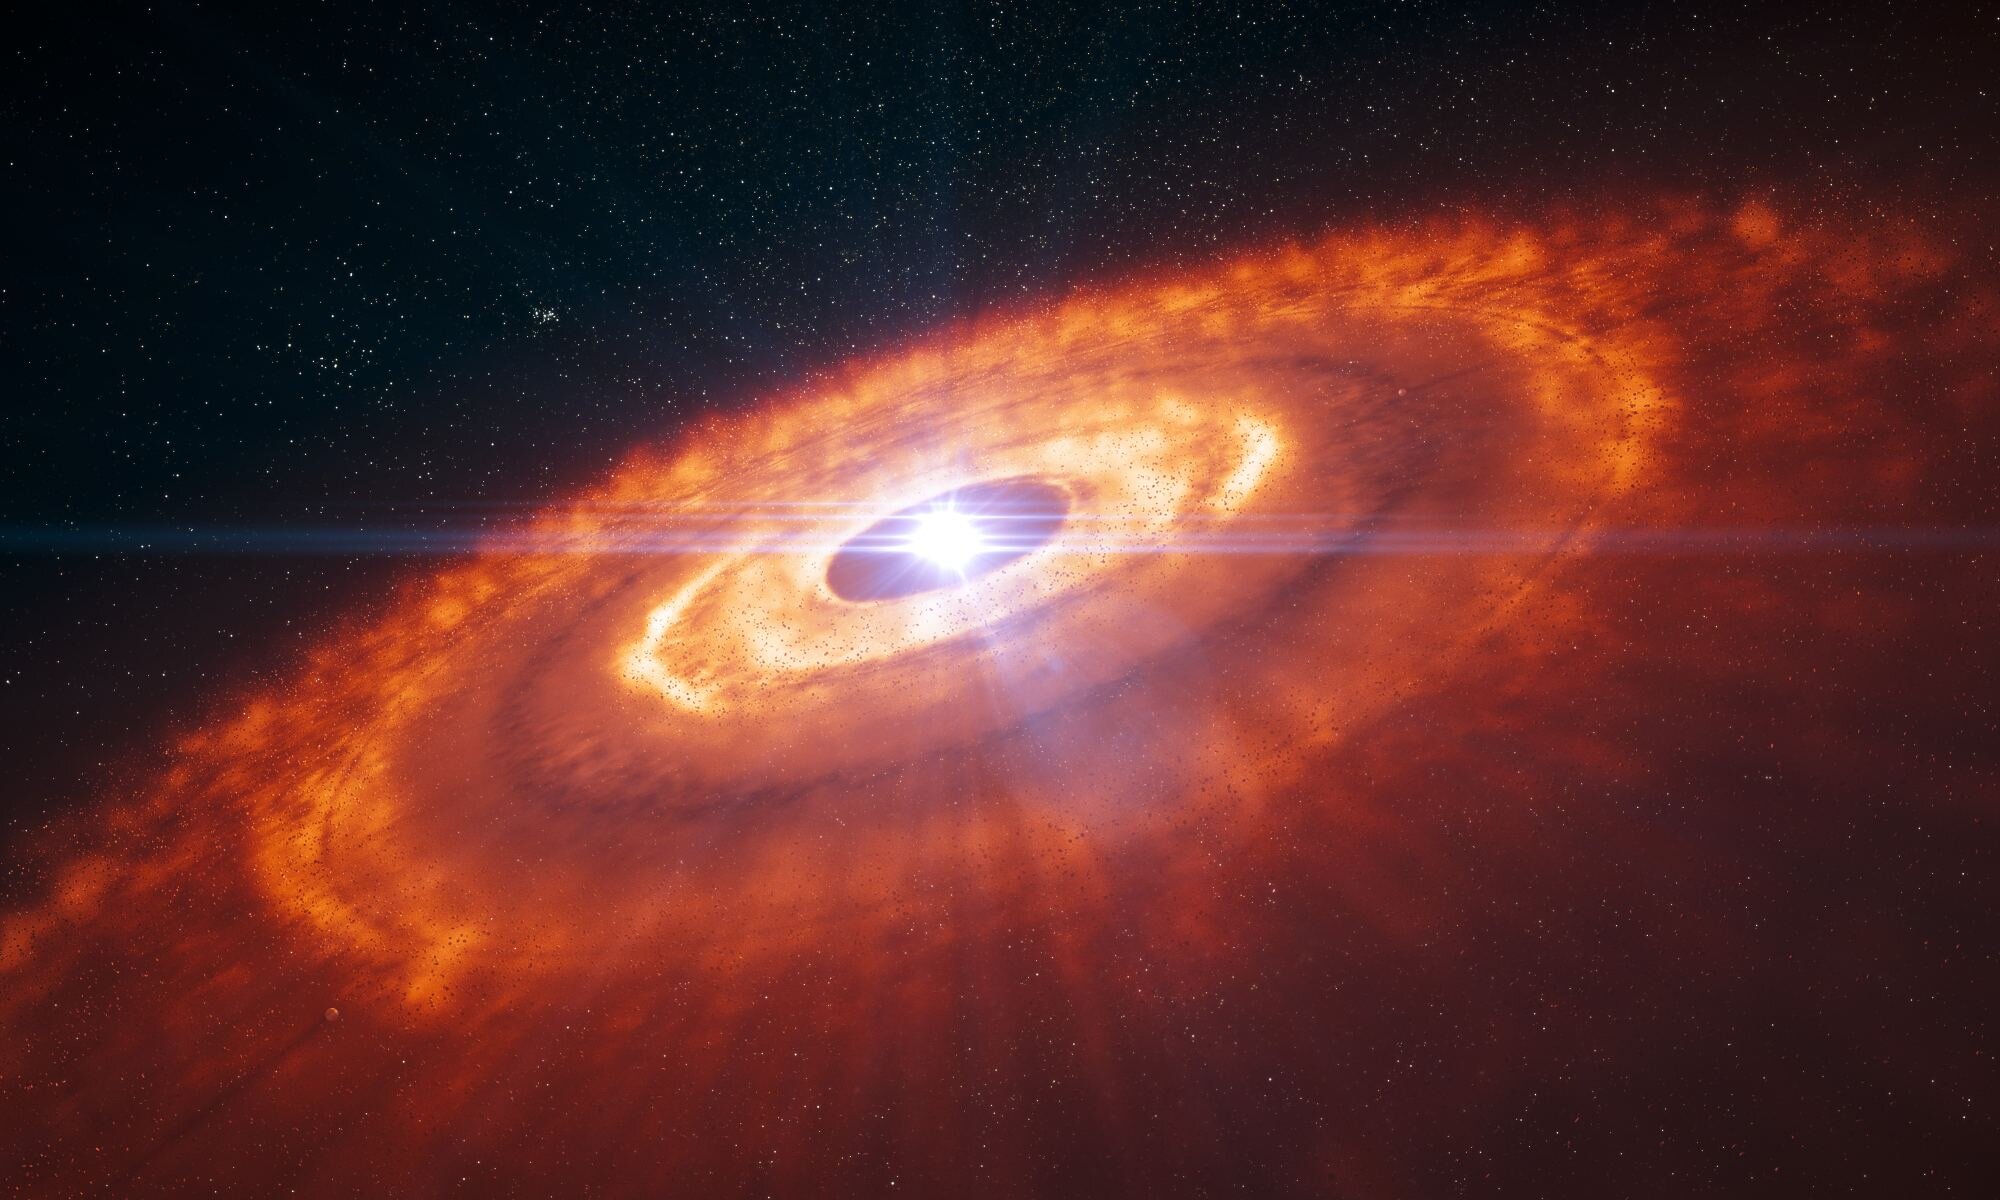 Do the Gaps in Protoplanetary Disks Truly Signify the Birth of New Planets?